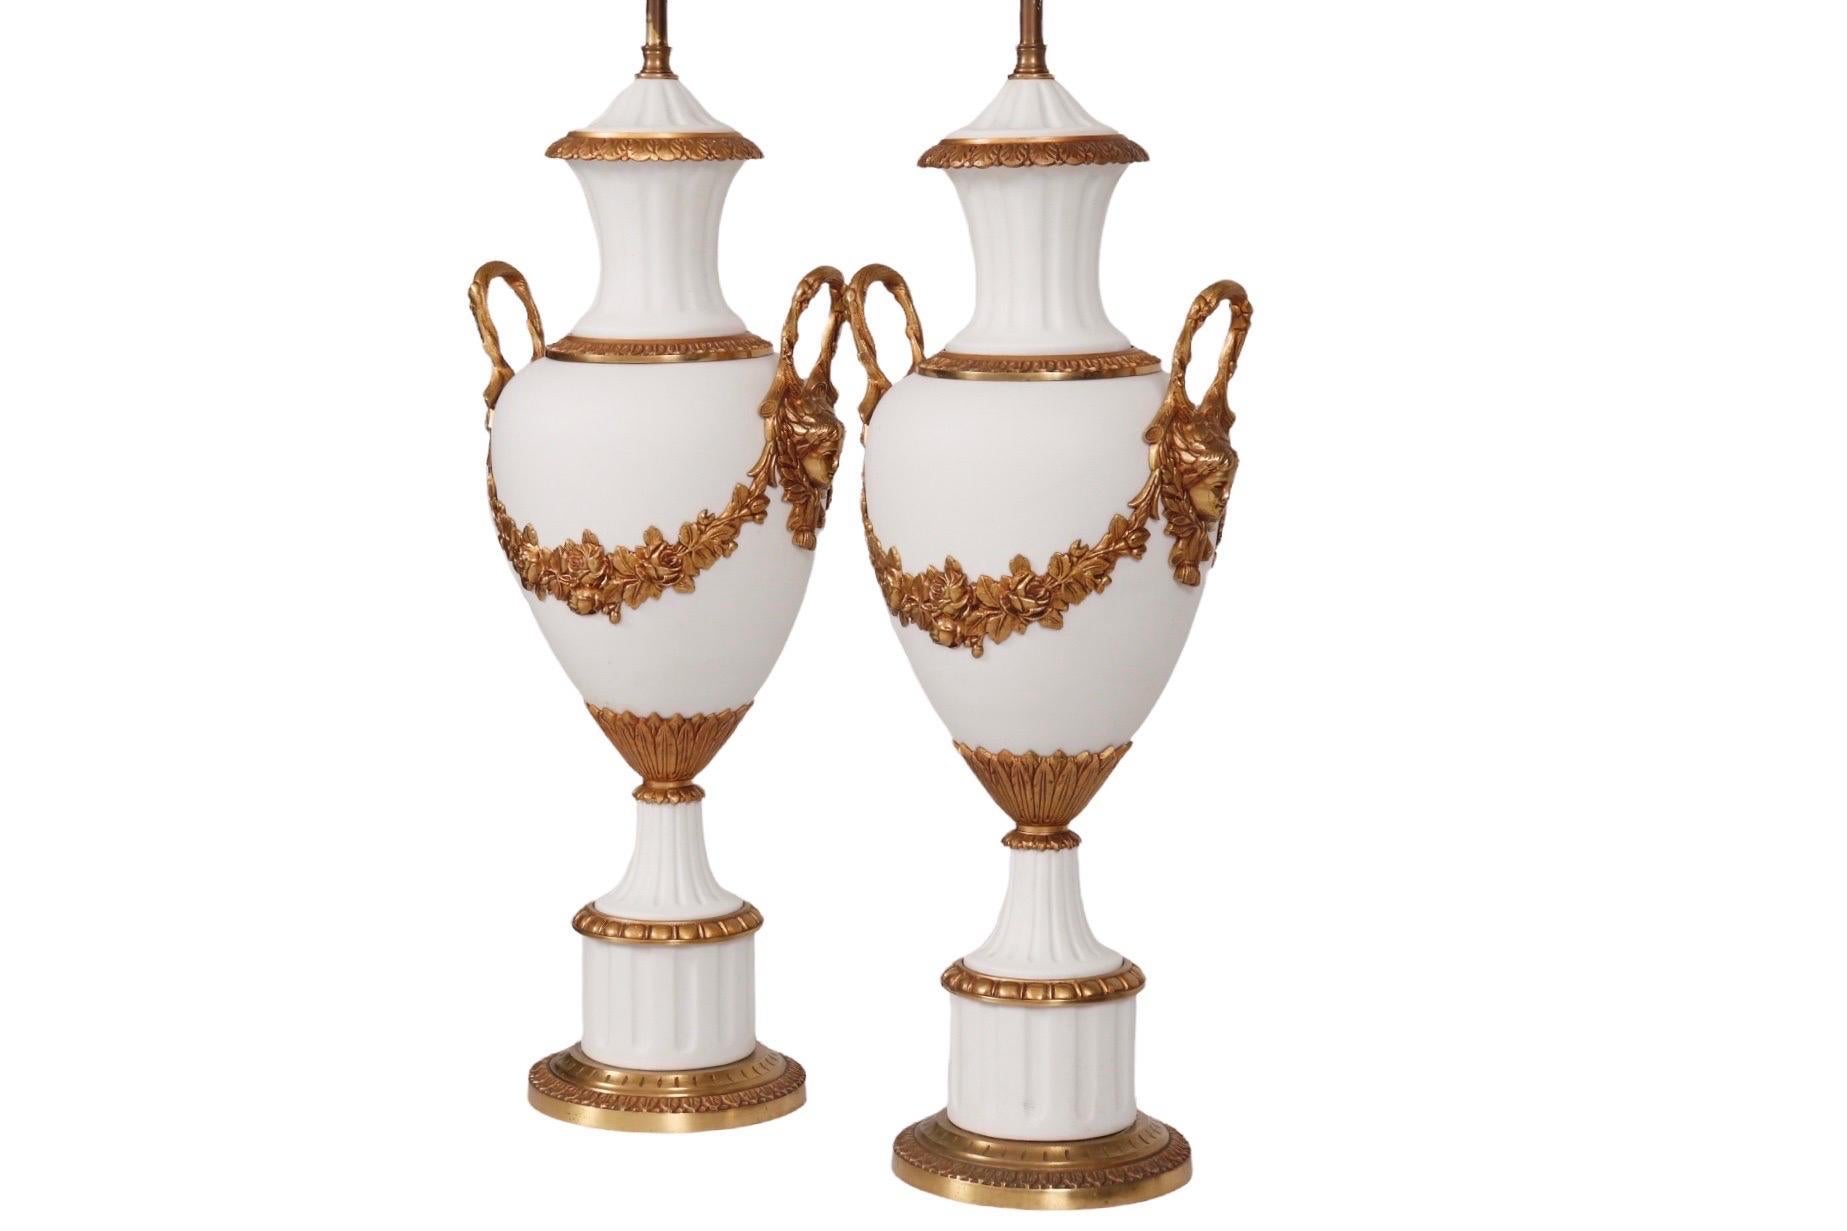 A pair of white bisque porcelain table lamps in the form of a Grecian urn, with fluting on the lid, neck and pedestal. Chased brass lotus leaves decorate the lid, base of the neck, round the lower body of the lamp and the pedestal base. Branch